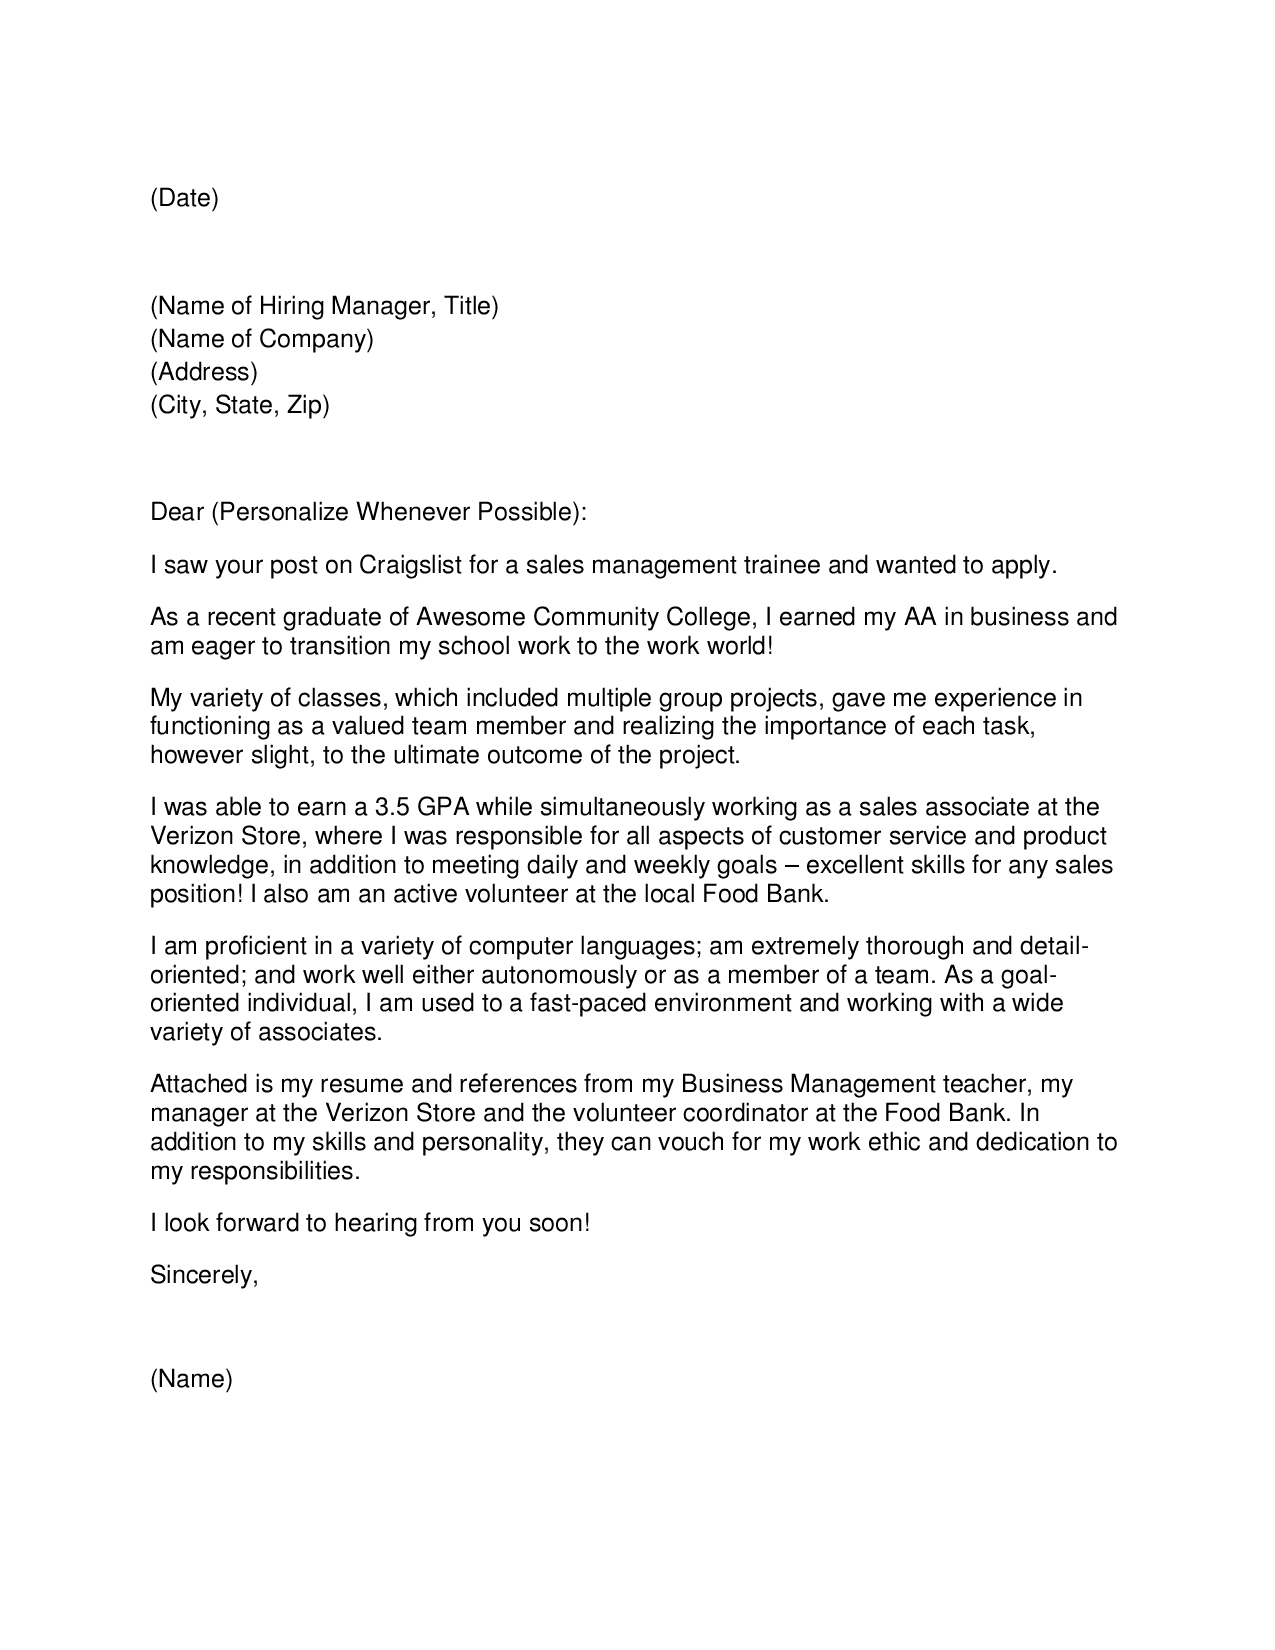 Sample cover letter for store manager position